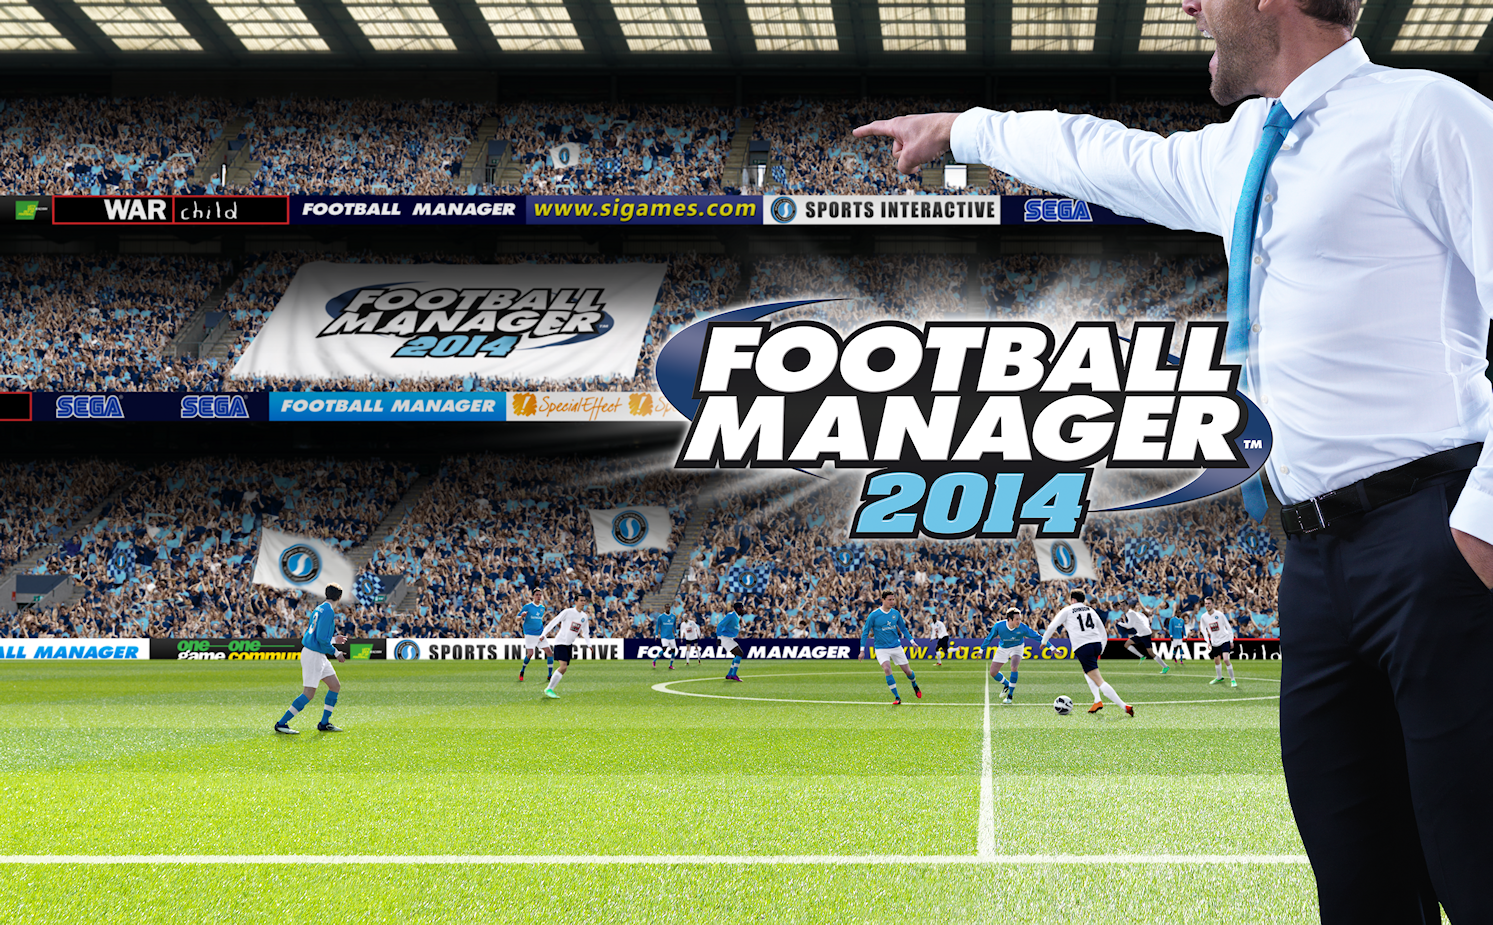 Football Manager 2014 PC Download Game for free